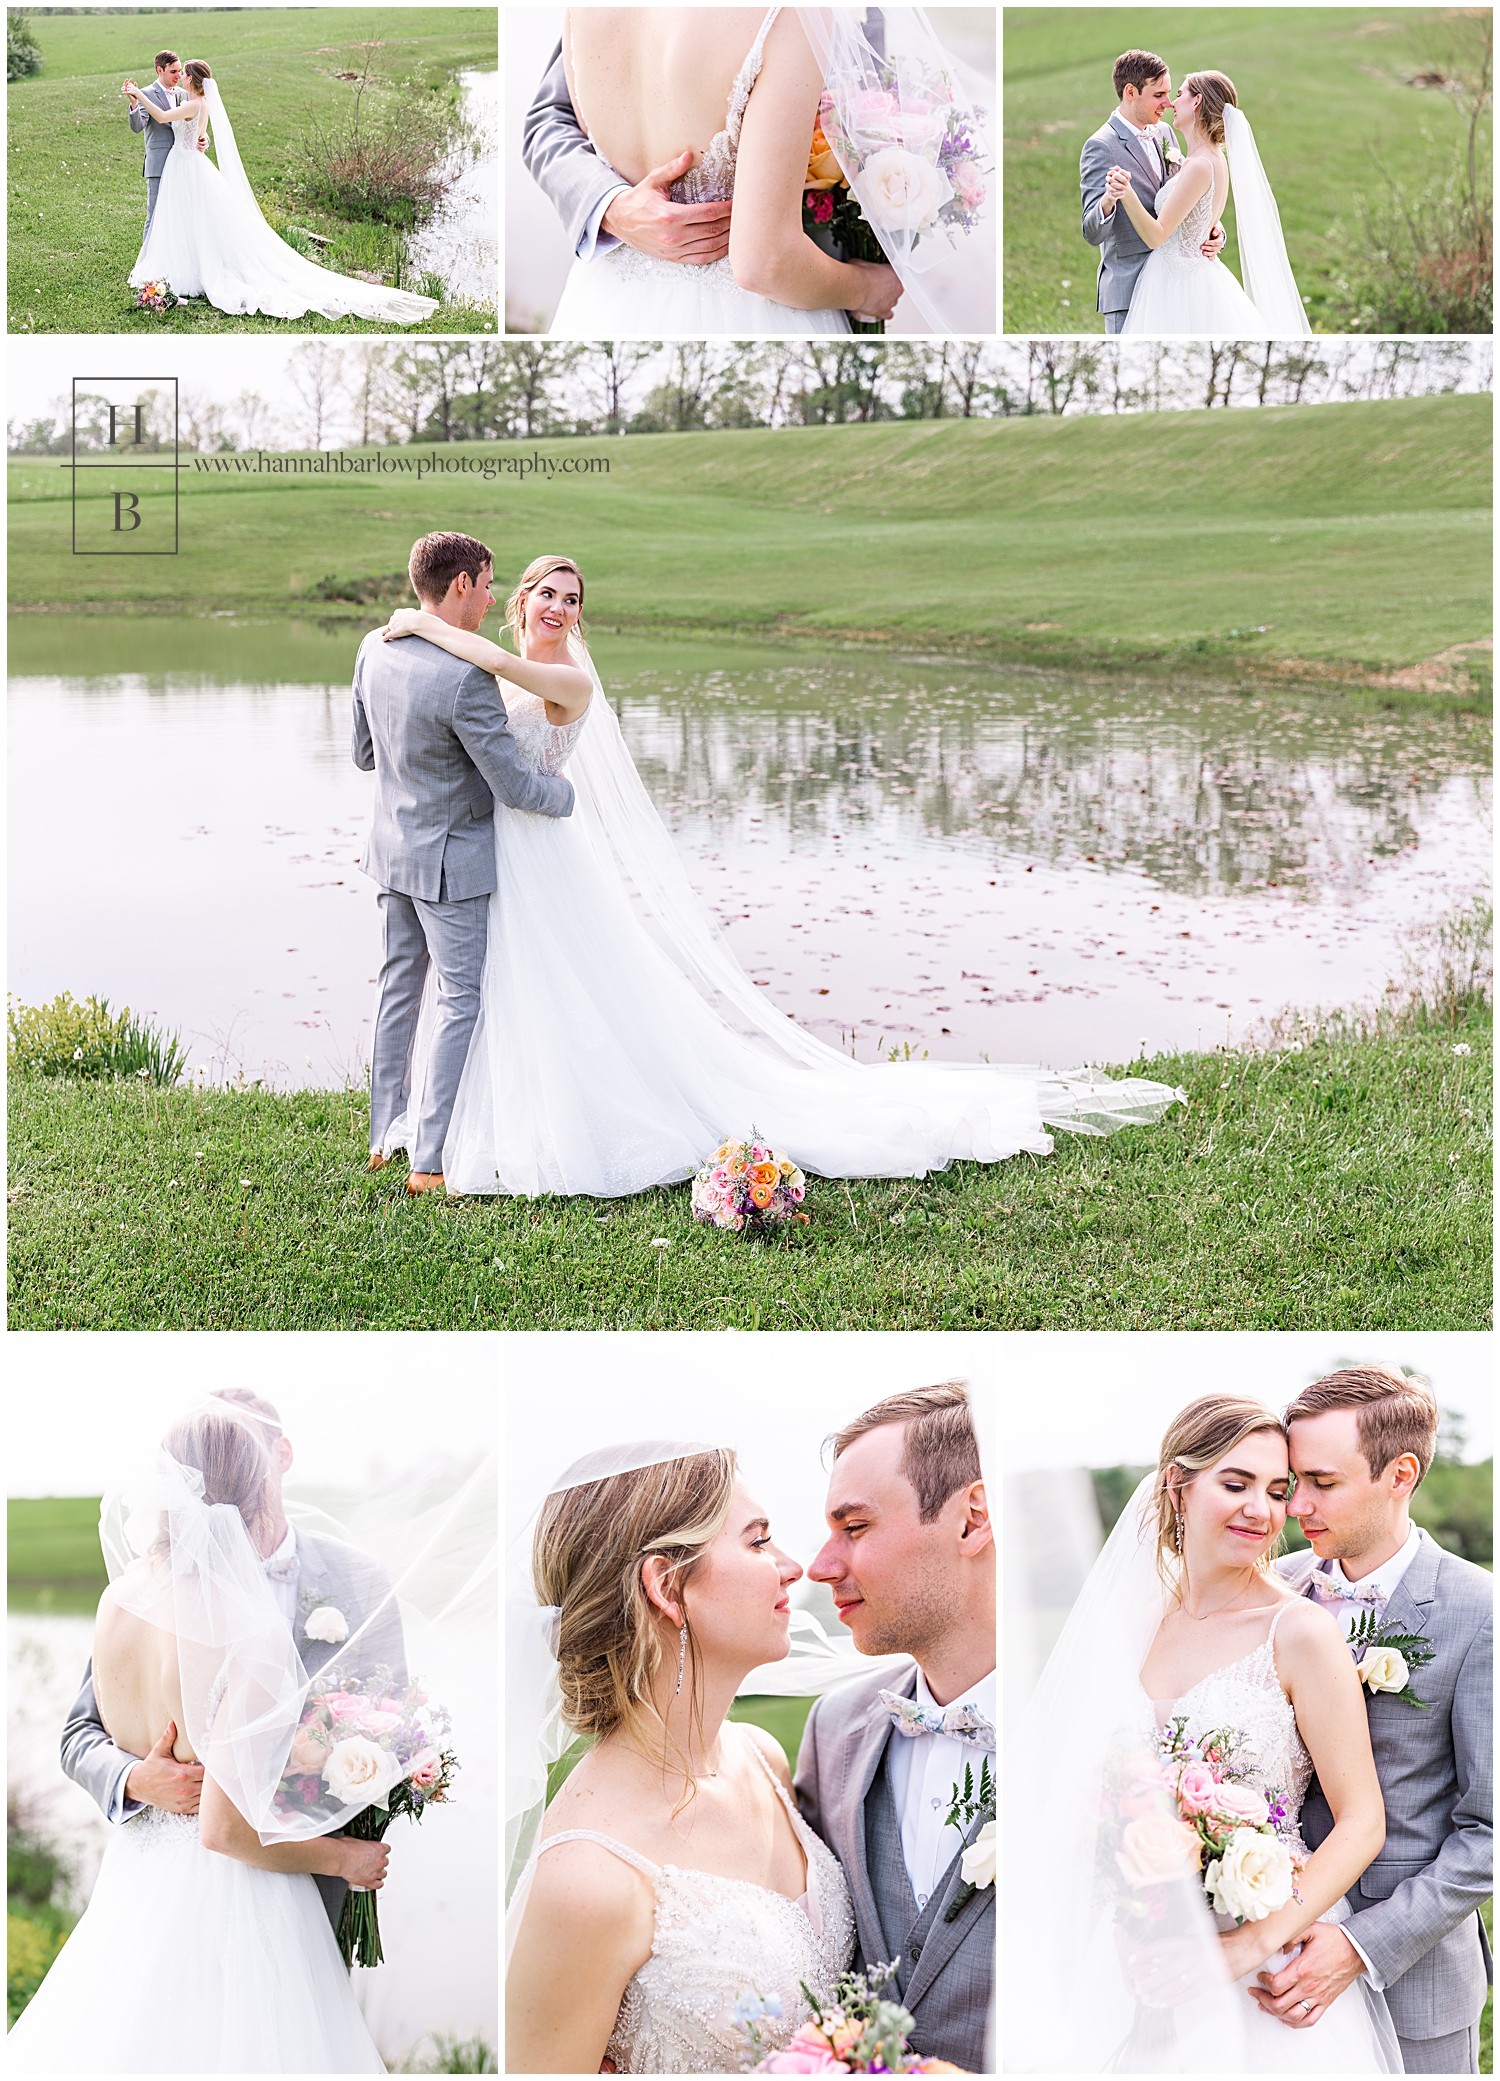 Bride and groom pose for Spring wedding portraits by the lake at the White Barn in Prospect, PA.